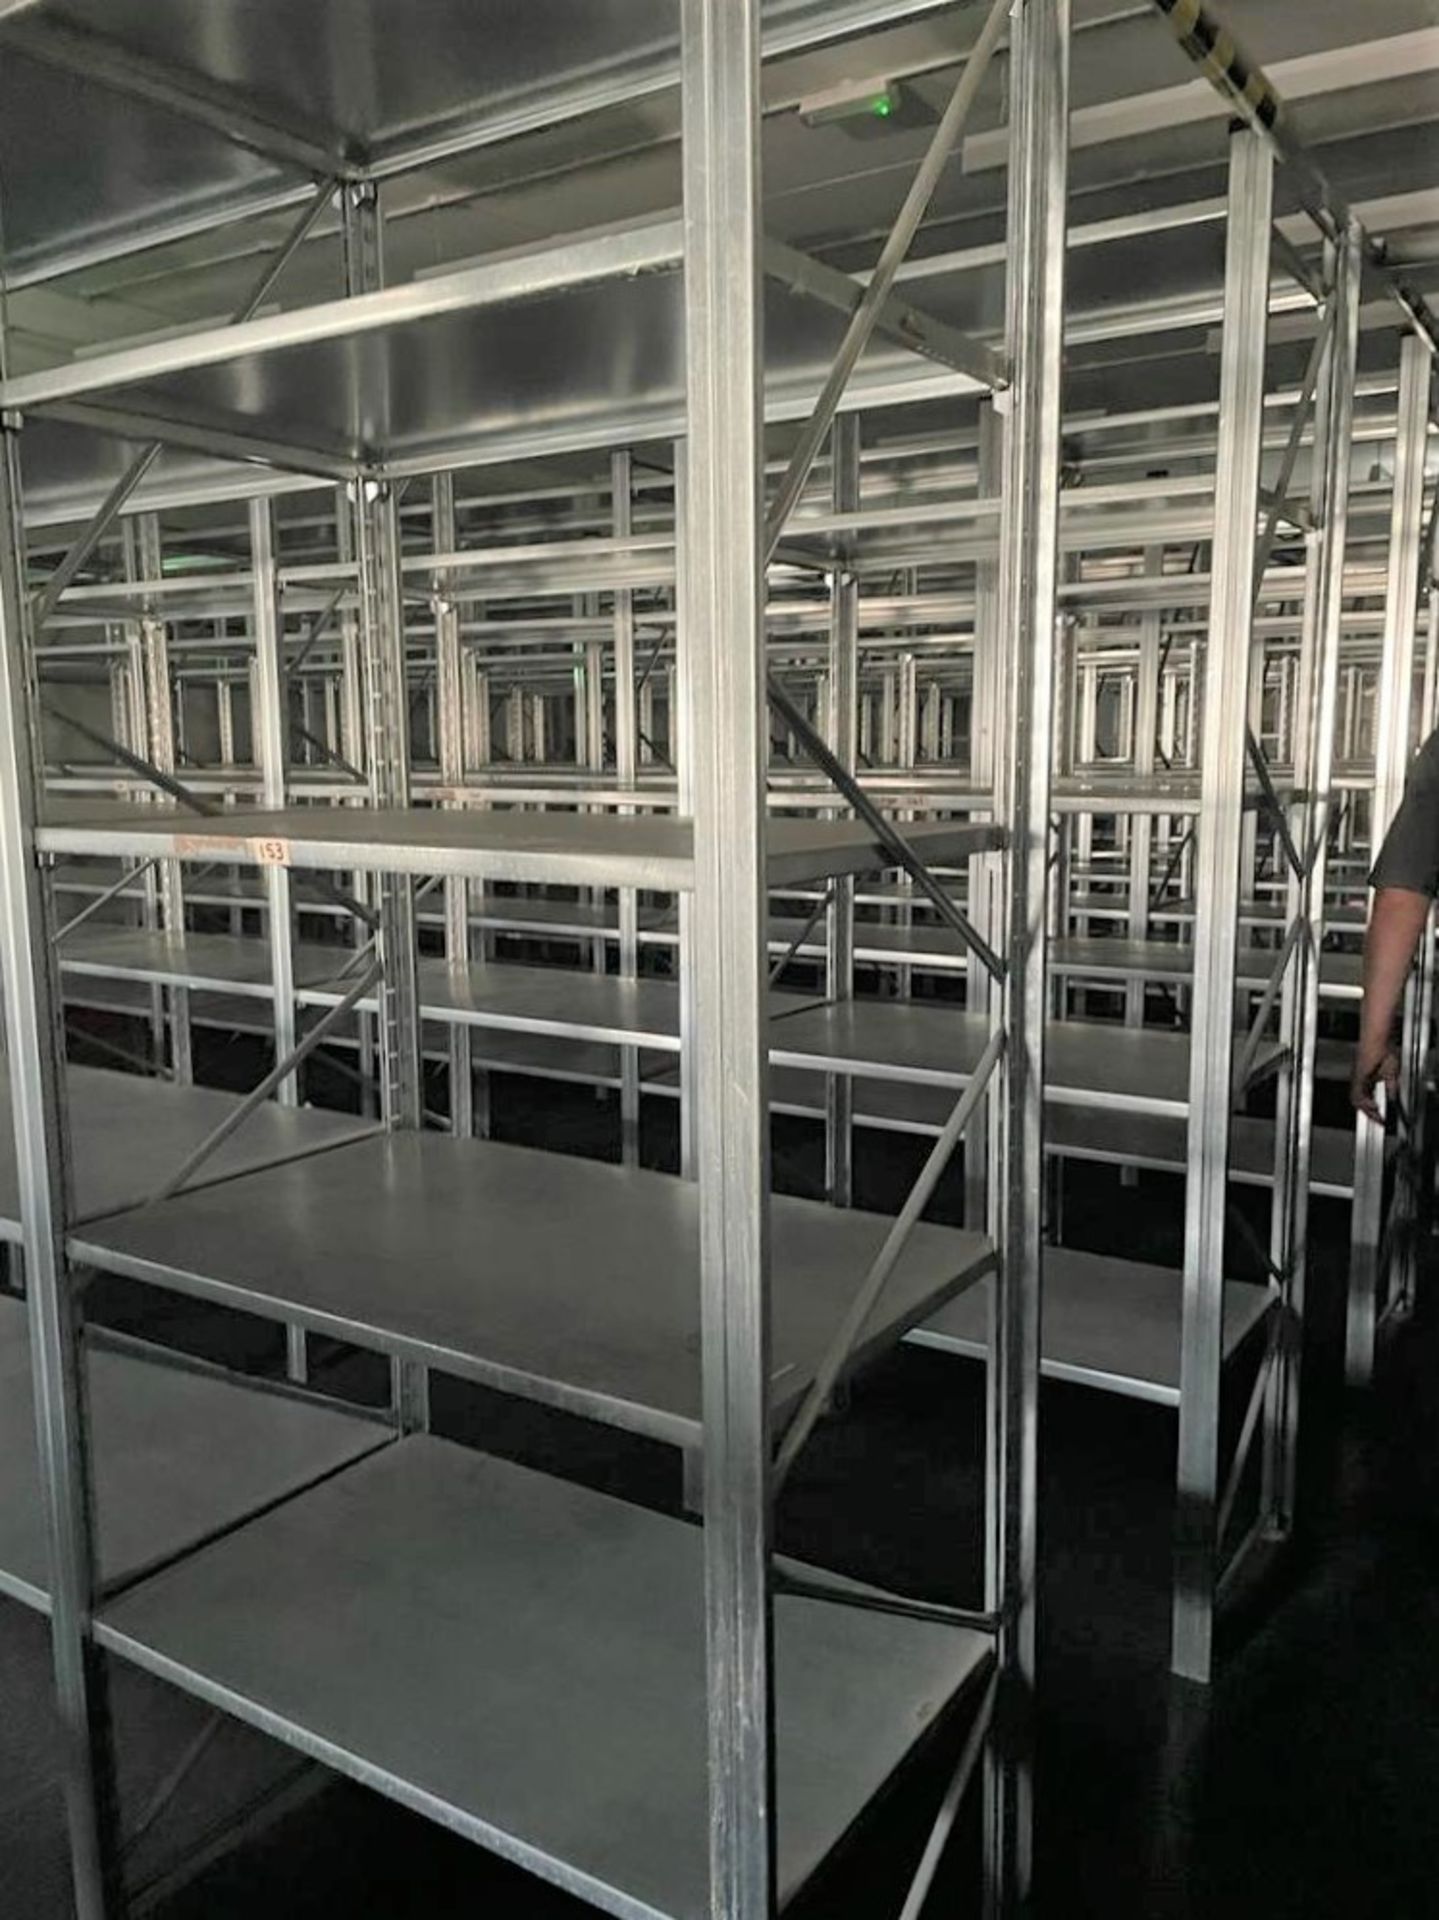 12 x Bays of High Quality Galvanised Steel Warehouse Shelving - Bay Dimensions: H250 x W100 x D60 - Image 3 of 12